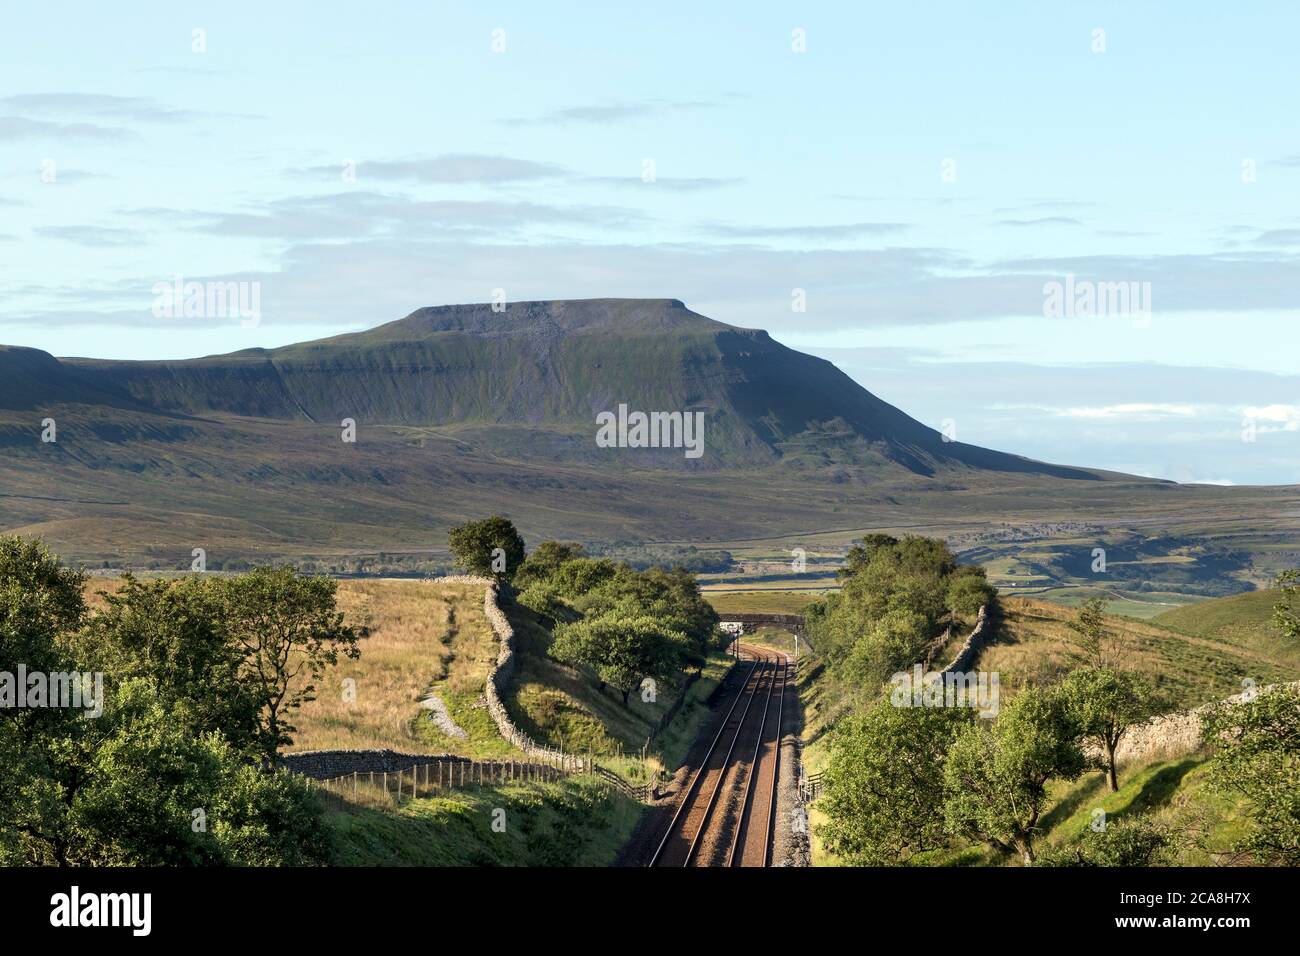 Ingleborough and the Settle to Carlisle Railway Line Viewed from Smithy Hill in Front of the Entrance to the Blea Moor Tunnel, Yorkshire Dales, UK Stock Photo